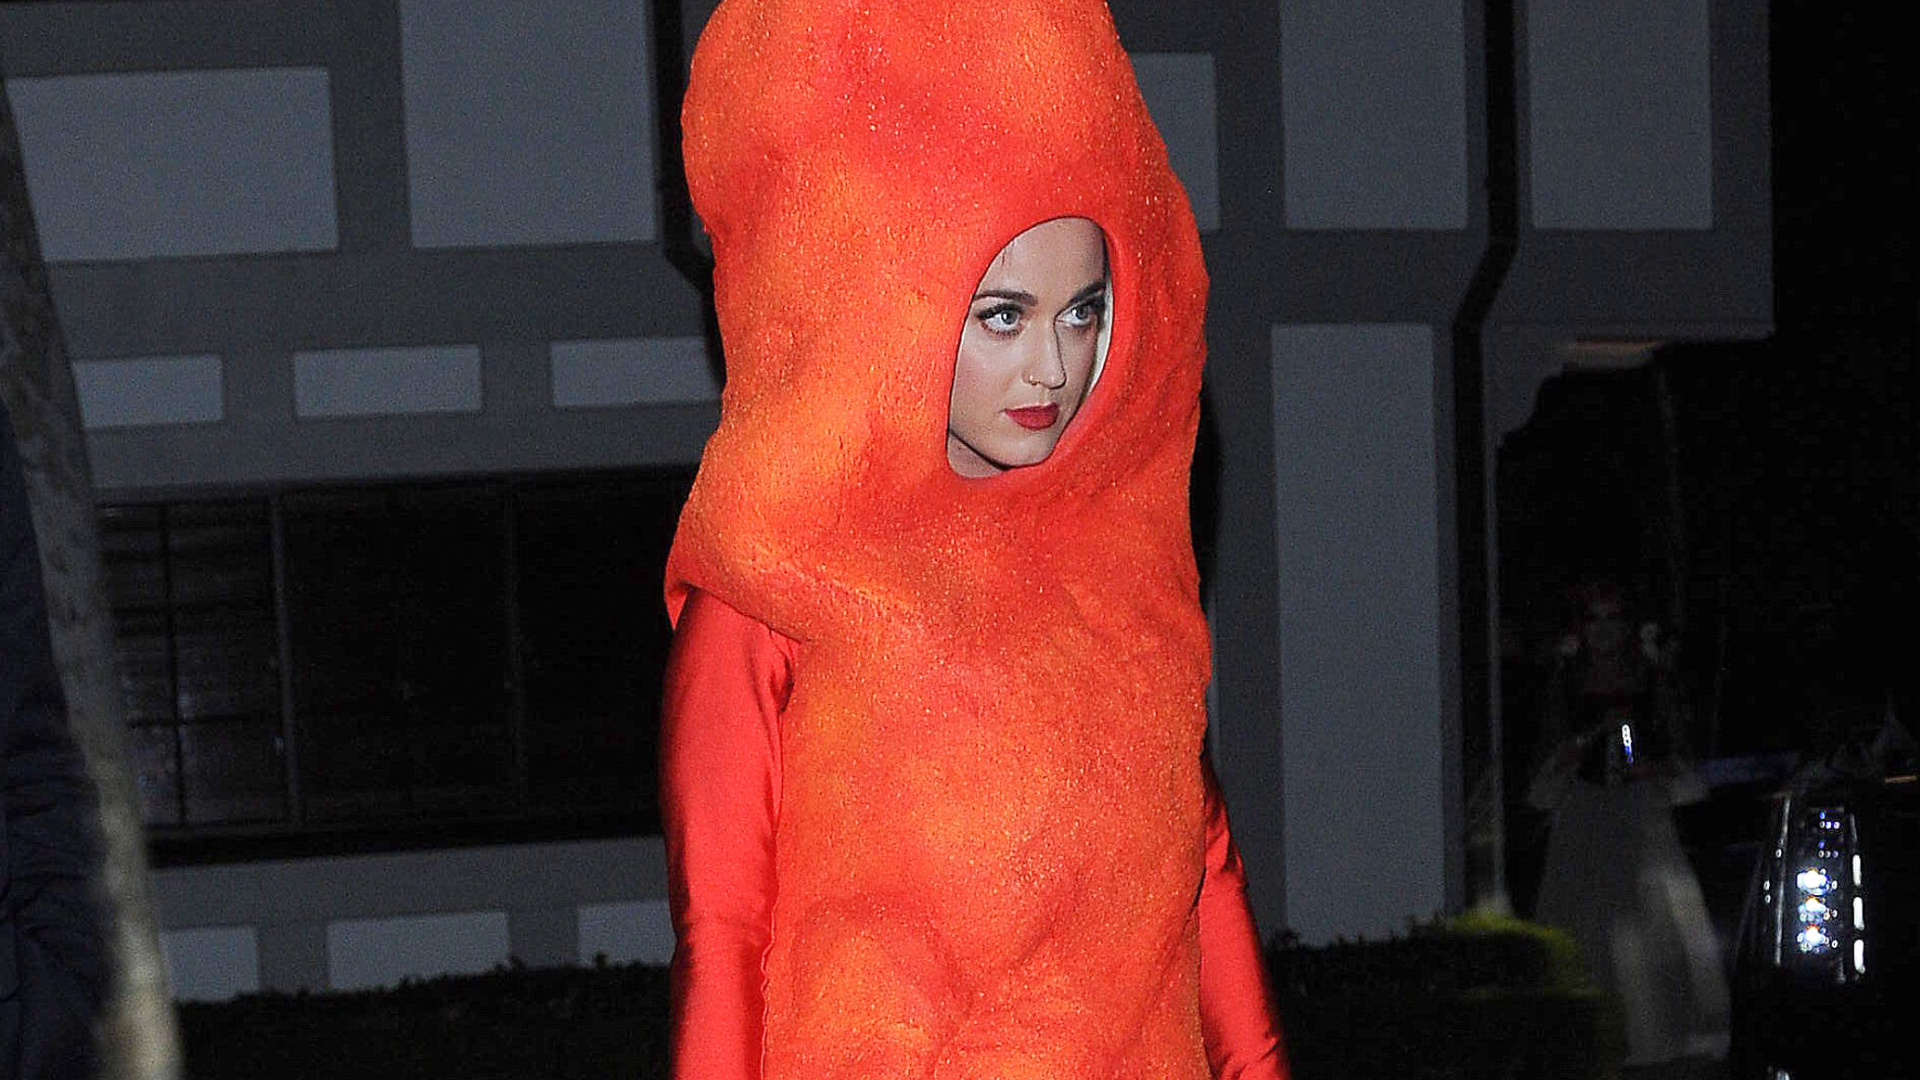 Katy Perry as a Cheeto